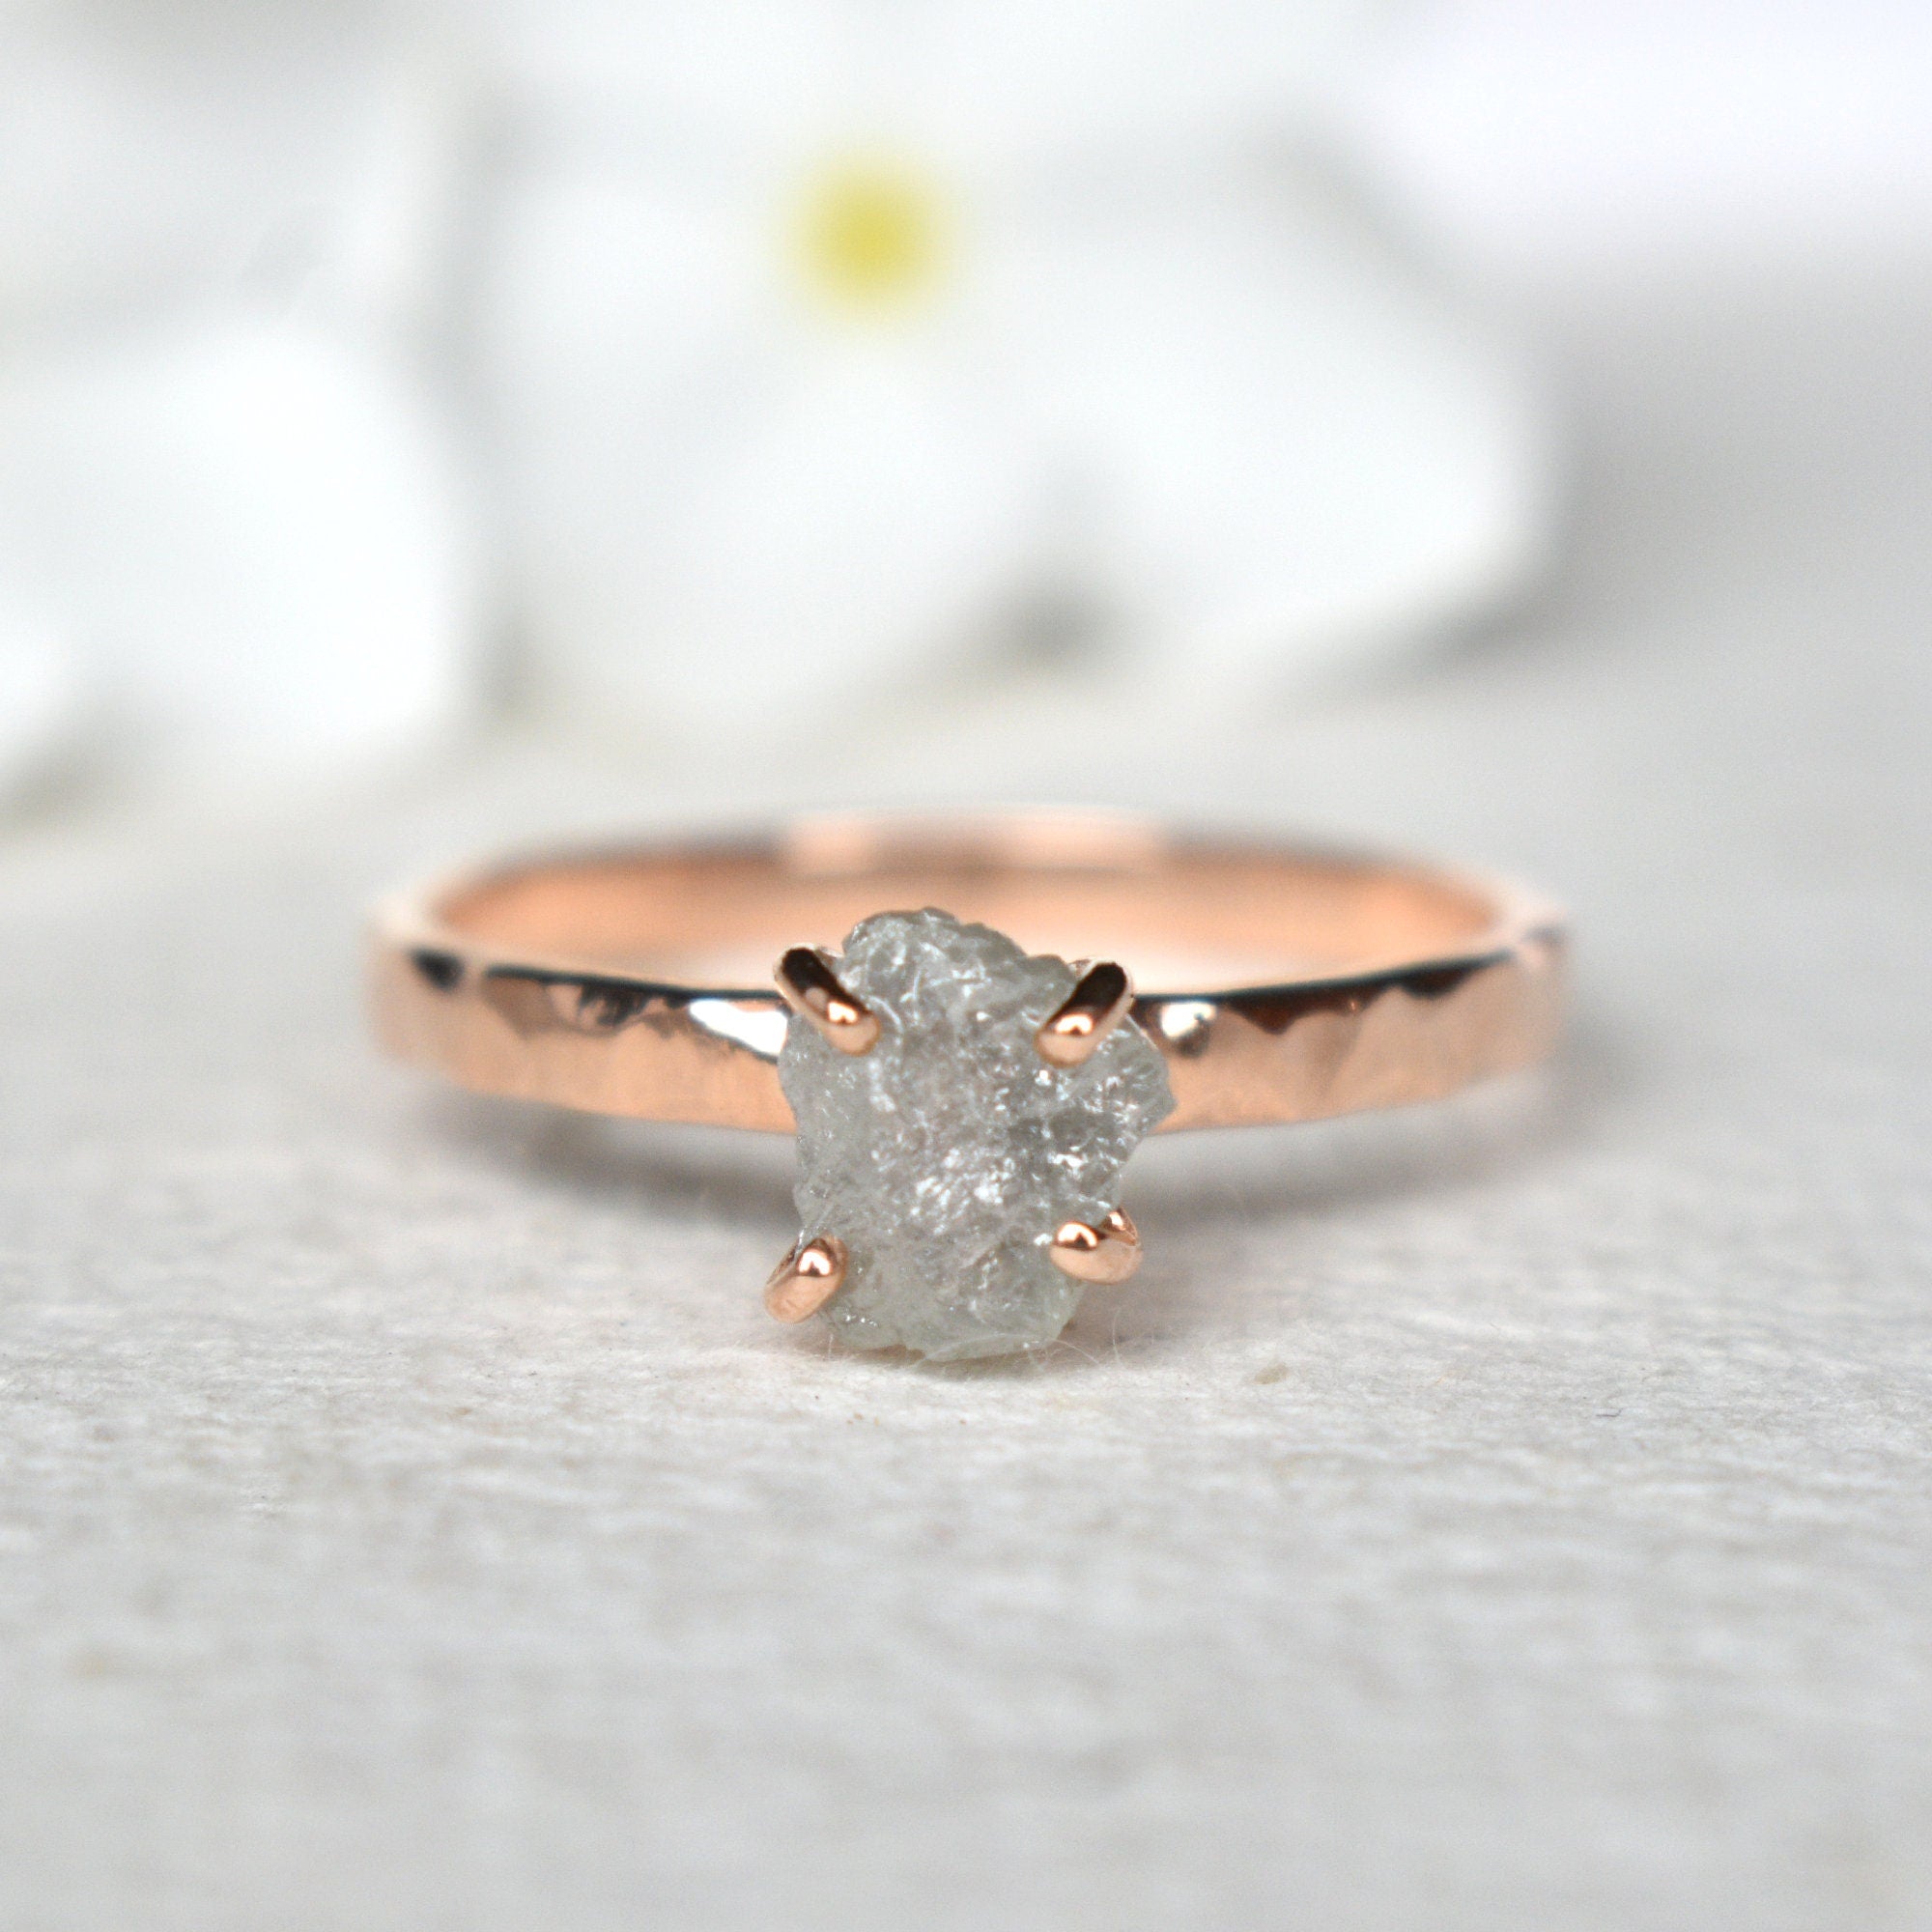 1 Carat Gray Rough Diamond Engagement Ring, 14K Rose Gold Claw Set Raw Diamond Ring, Hammered Band, Unique Promise Proposal Ring